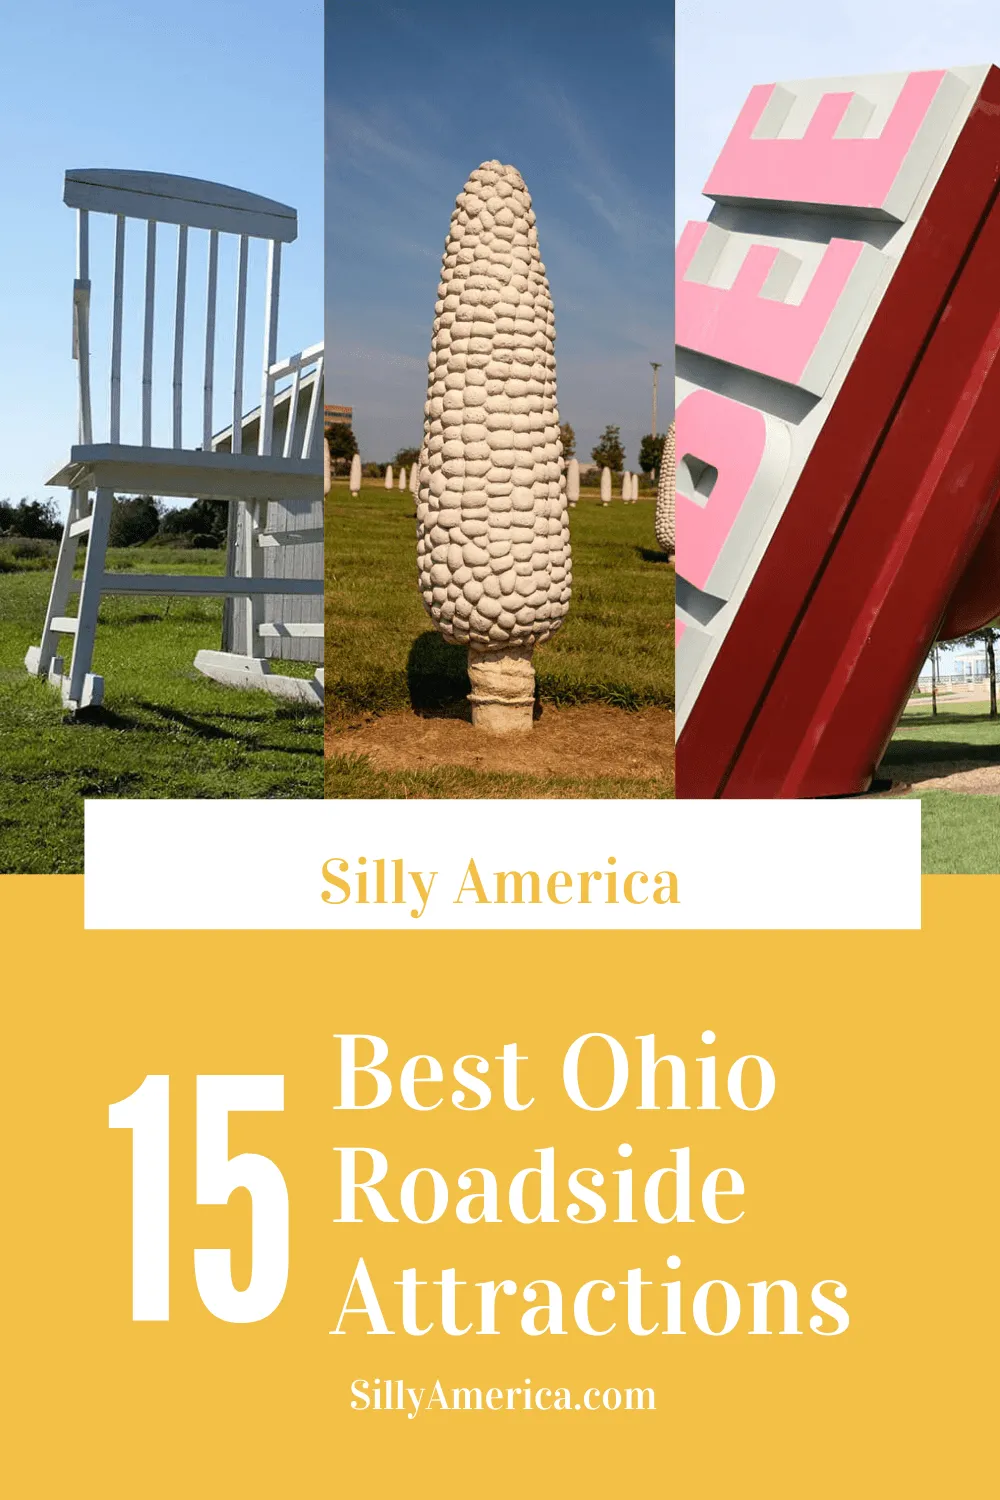 The best Ohio roadside attractions to visit on an Ohio road trip or weekend getaway. Add these roadside oddities and road trip stops to your bucket list and visit these roadside attractions in Ohio on your next travel adventure. #OhioRoadsideAttractions #OhioRoadsideAttraction #RoadsideAttractions #RoadsideAttraction #RoadTrip #OhioRoadTrip #OhioRoadTripDestinations #OhioRoadTripIdeas #OhioRoadTripWithKids #OhioRoadTripBucketLists #OhioBucketList #OhioRoadTripIdeas #OhioRoadTripMap